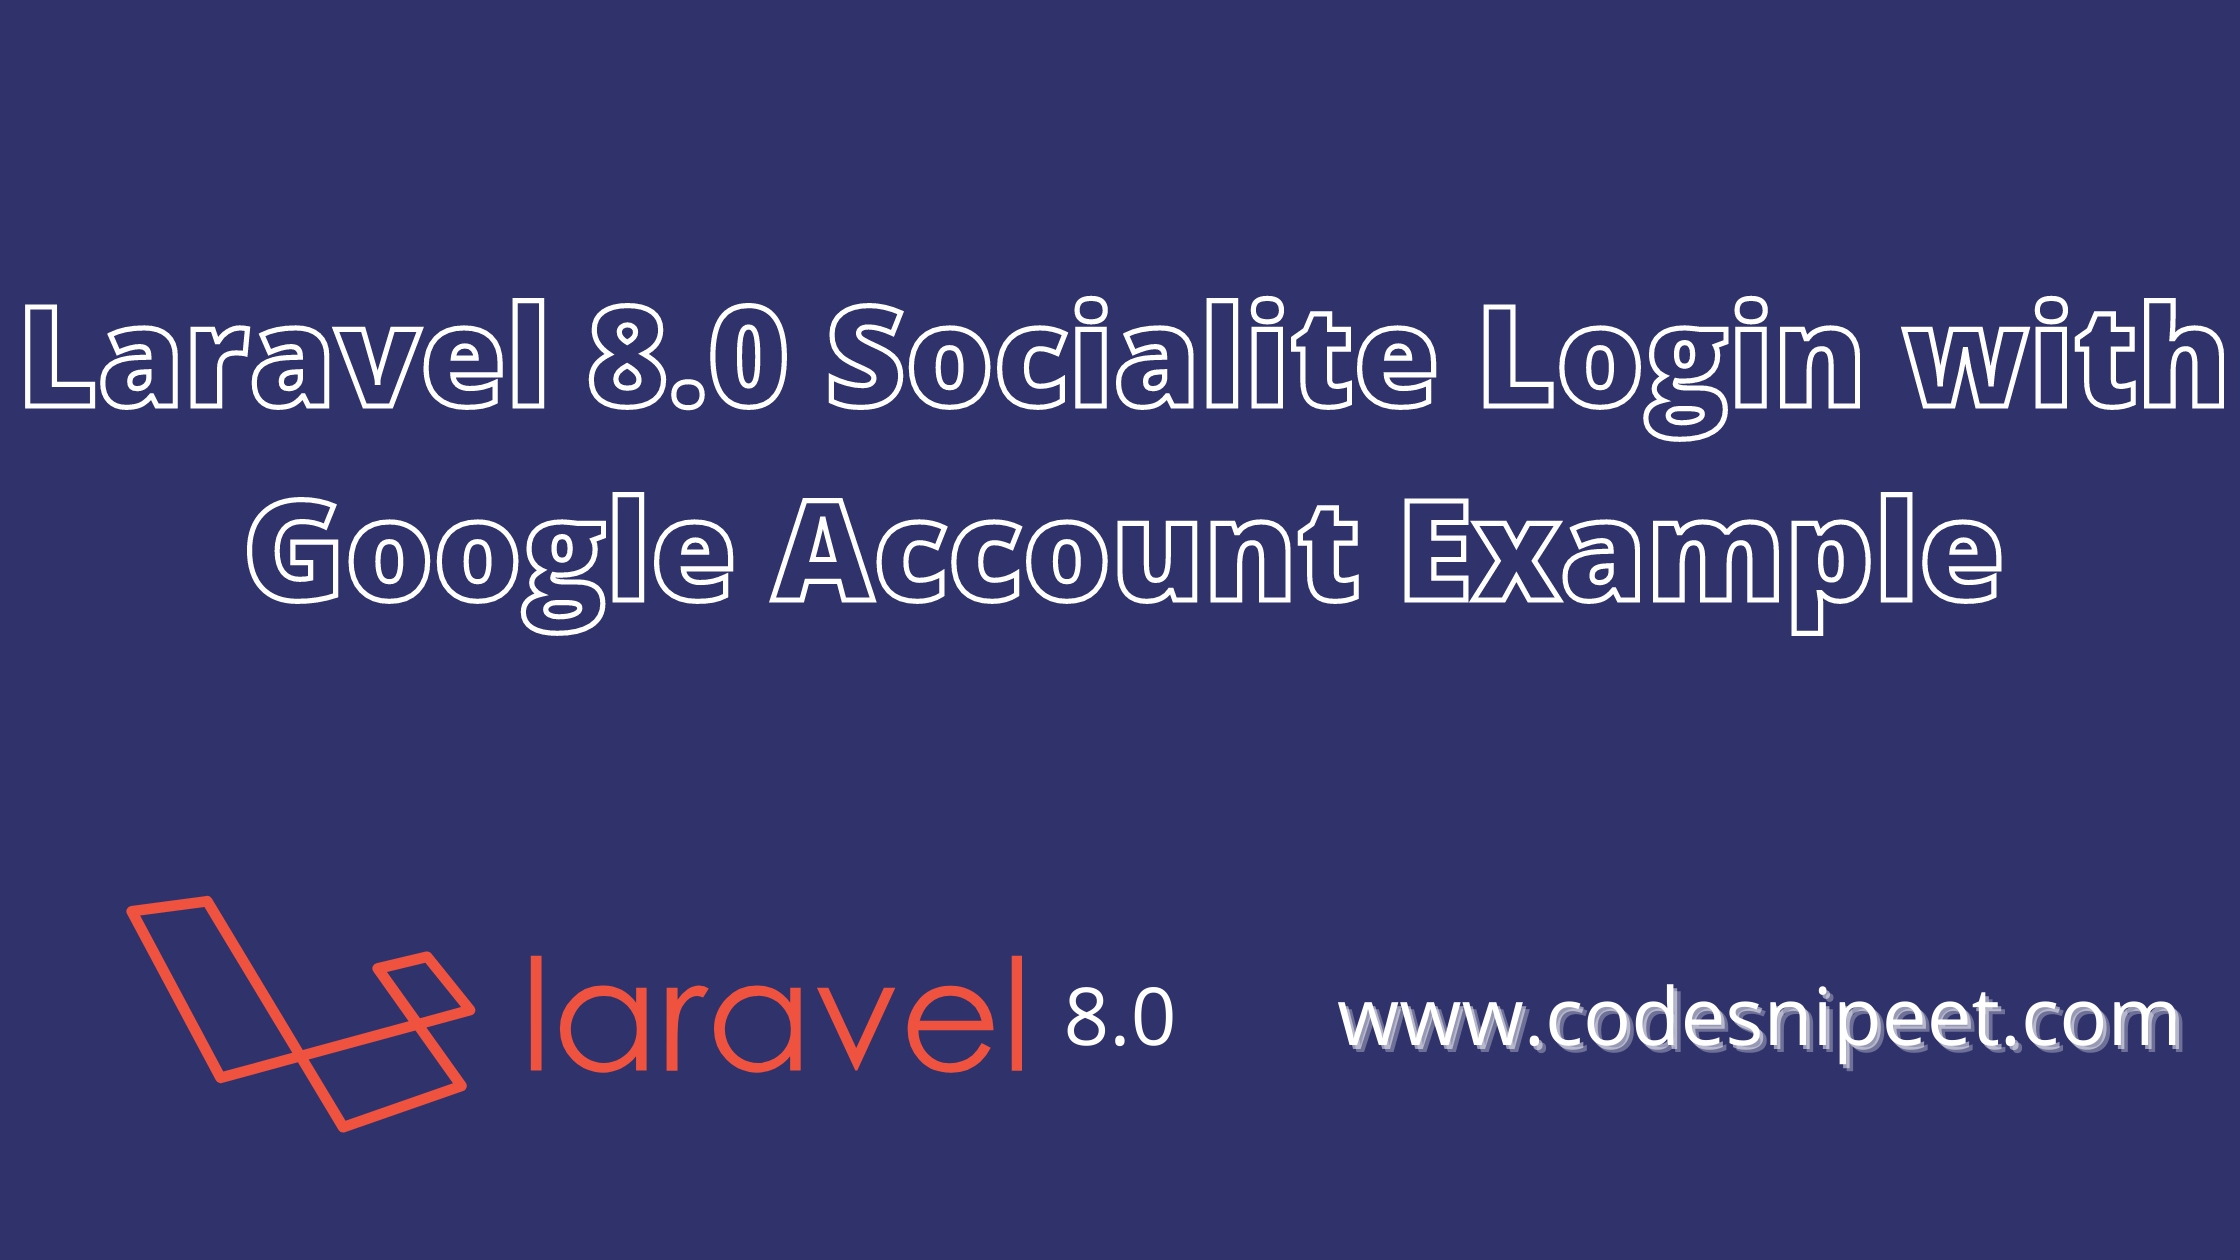 You are currently viewing Laravel 8.0 Socialite Login with Google Account Example